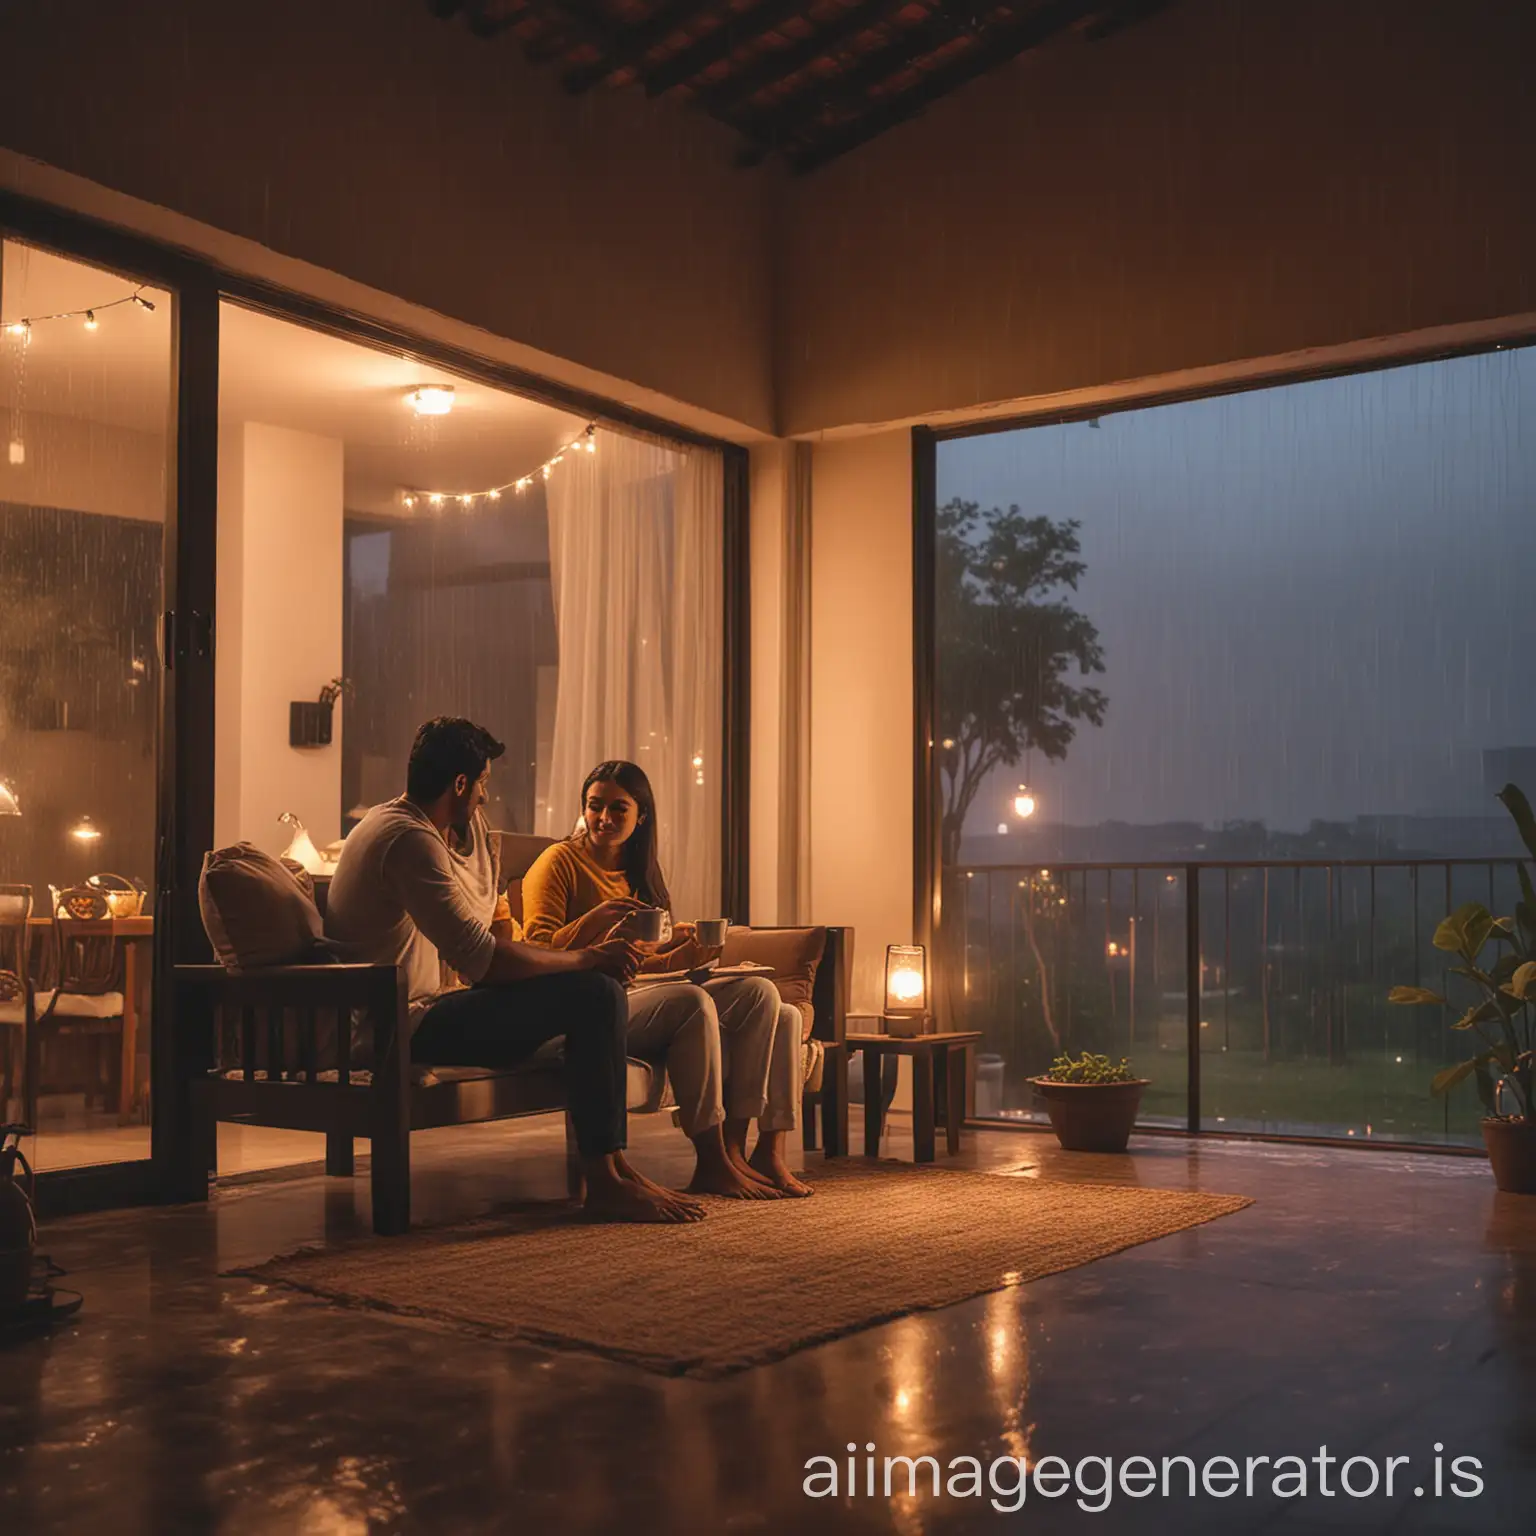 indian guy sitting in his leaving room with his wife of his villa with hot tea. seeing out side rainning in dark cloudy weather. room is with warm lights with romantic vibe